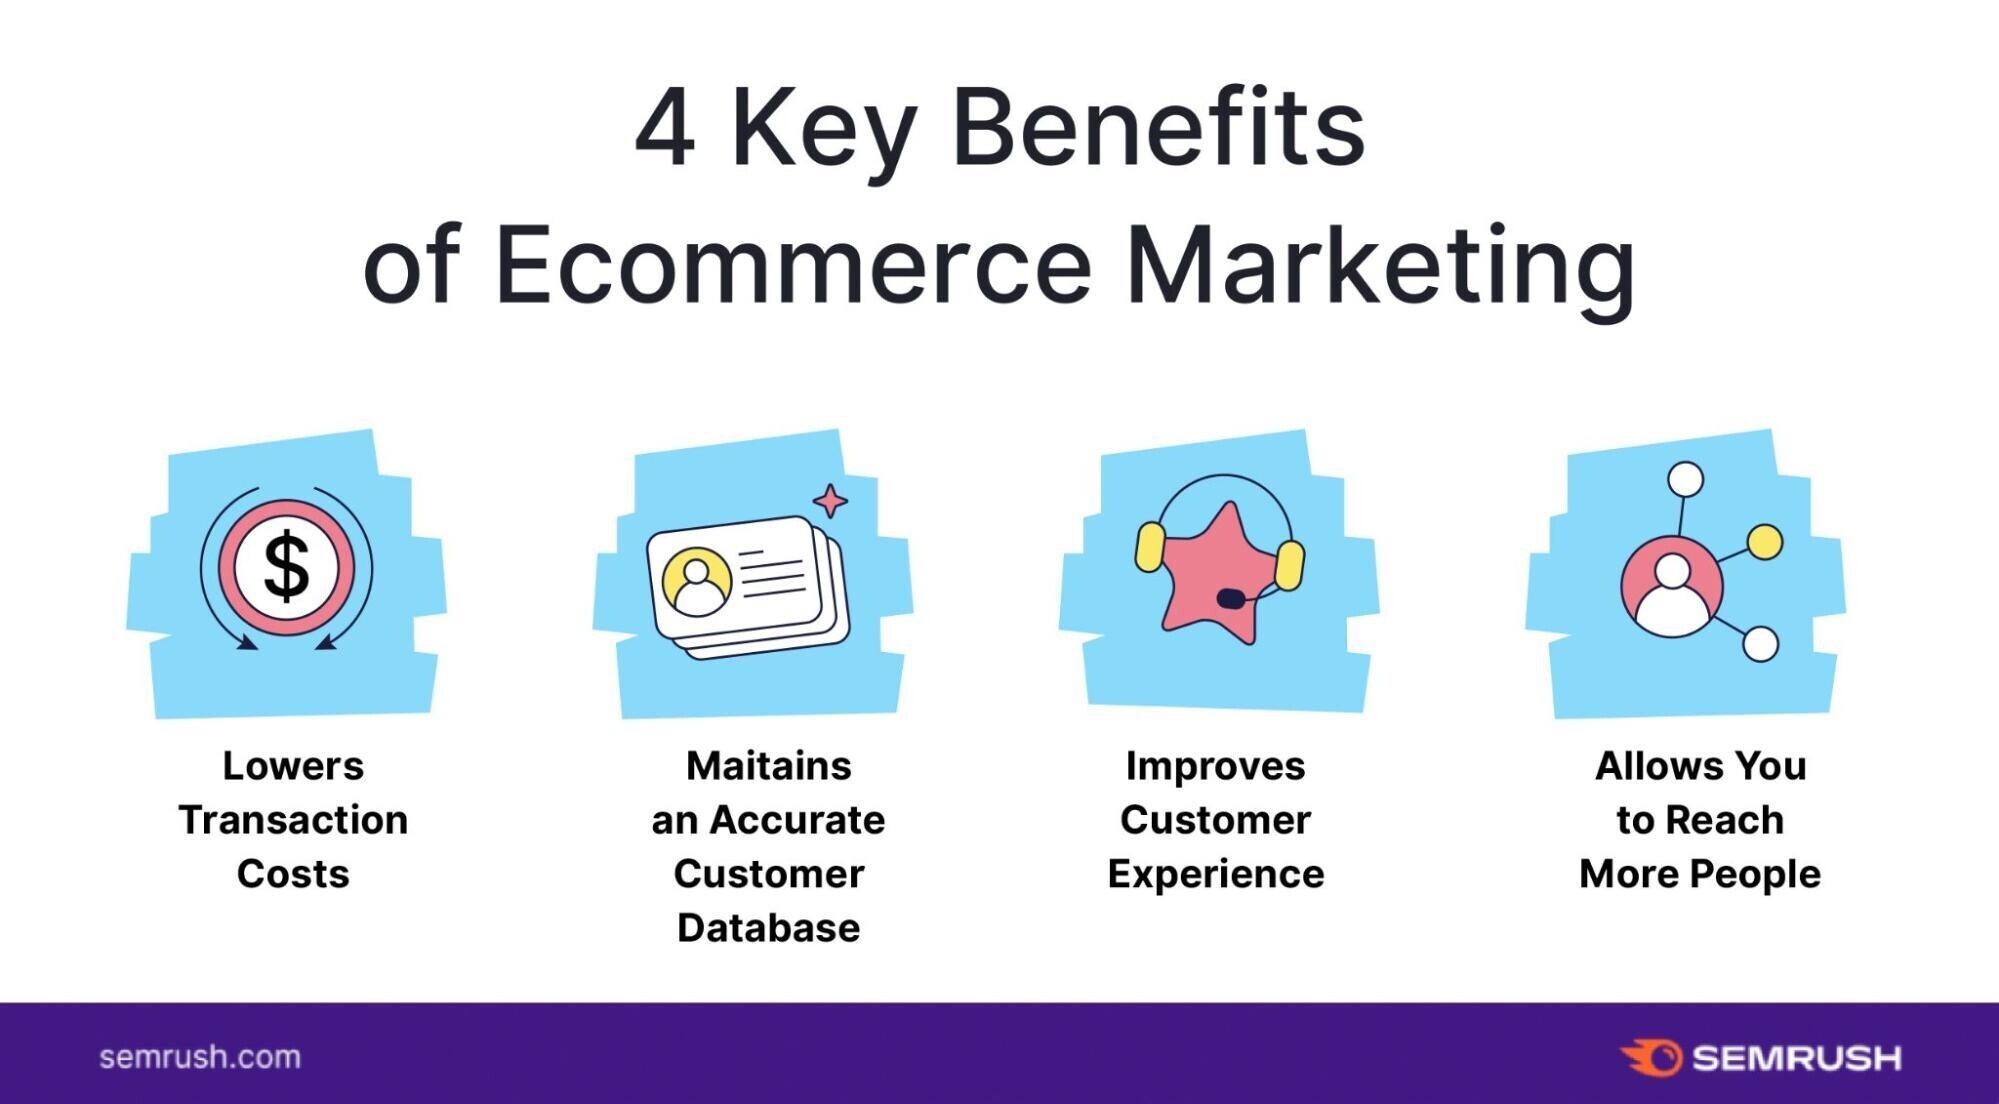 ecommerce marketing helps businesses lower transaction costs, maintain a customer base, improve customer service, and reach more customers.